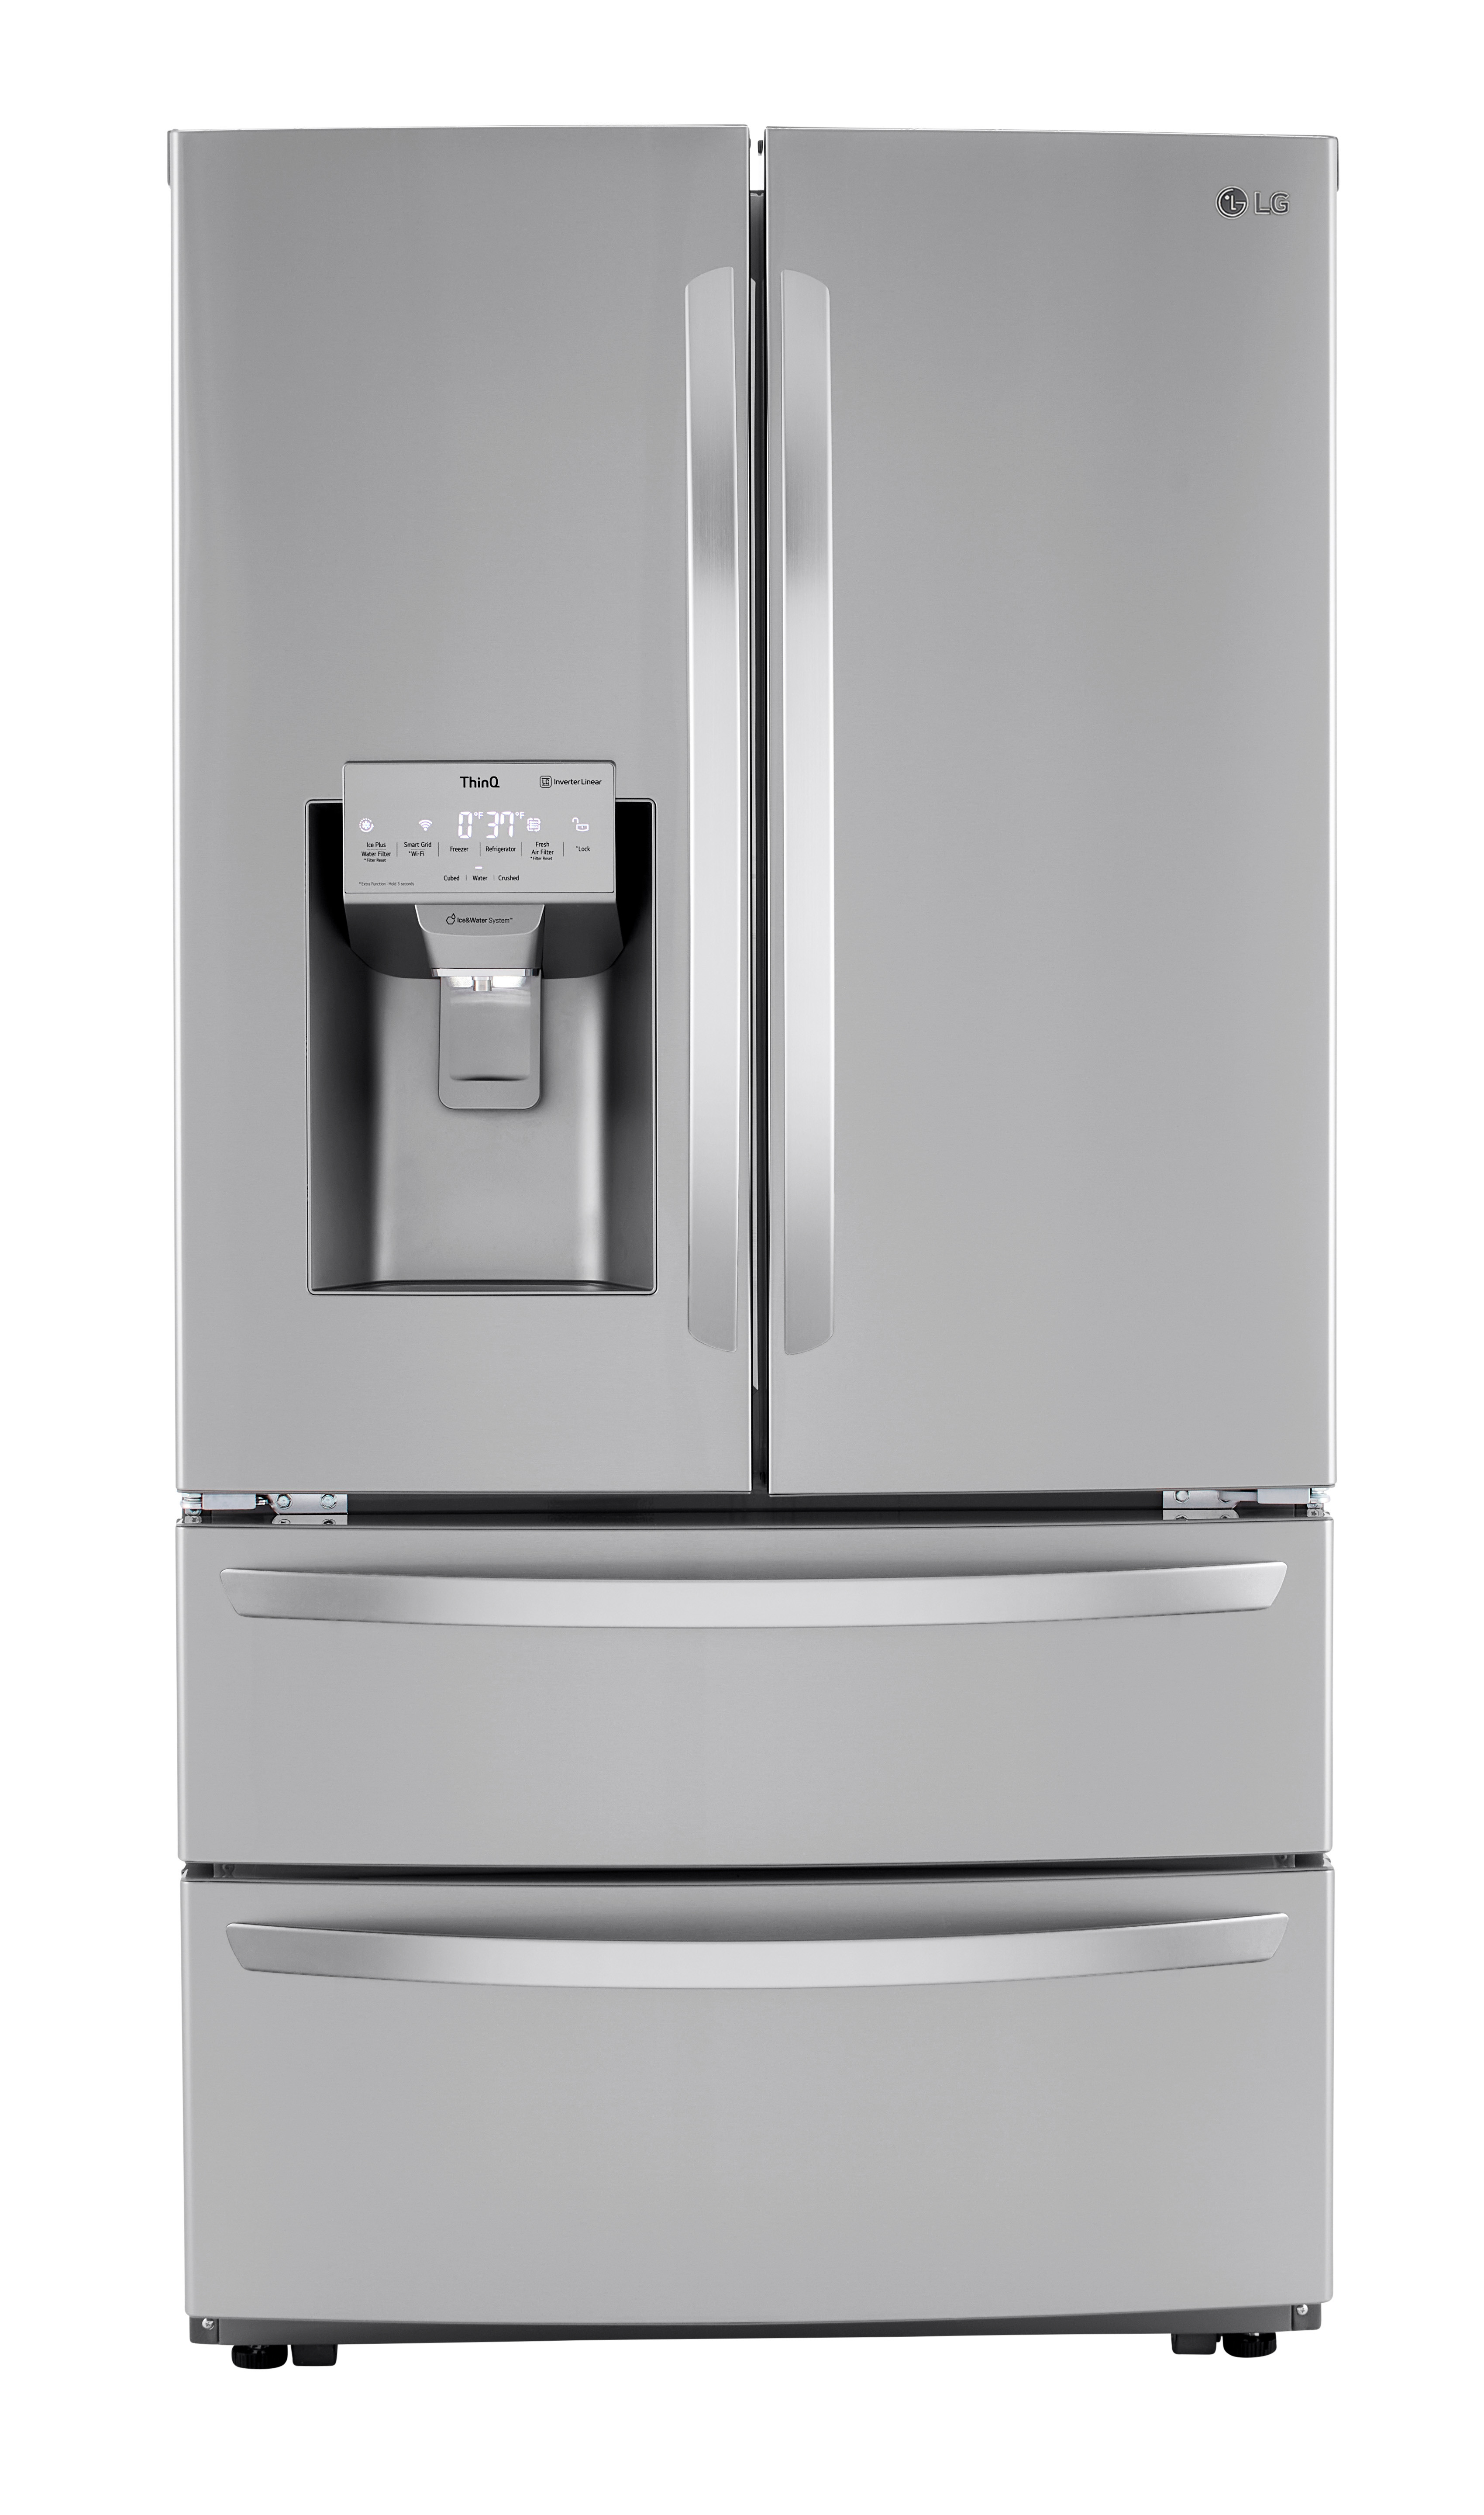 5 Refrigerator Ice Makers Worthy of Cheers, Spencer's TV & Appliance